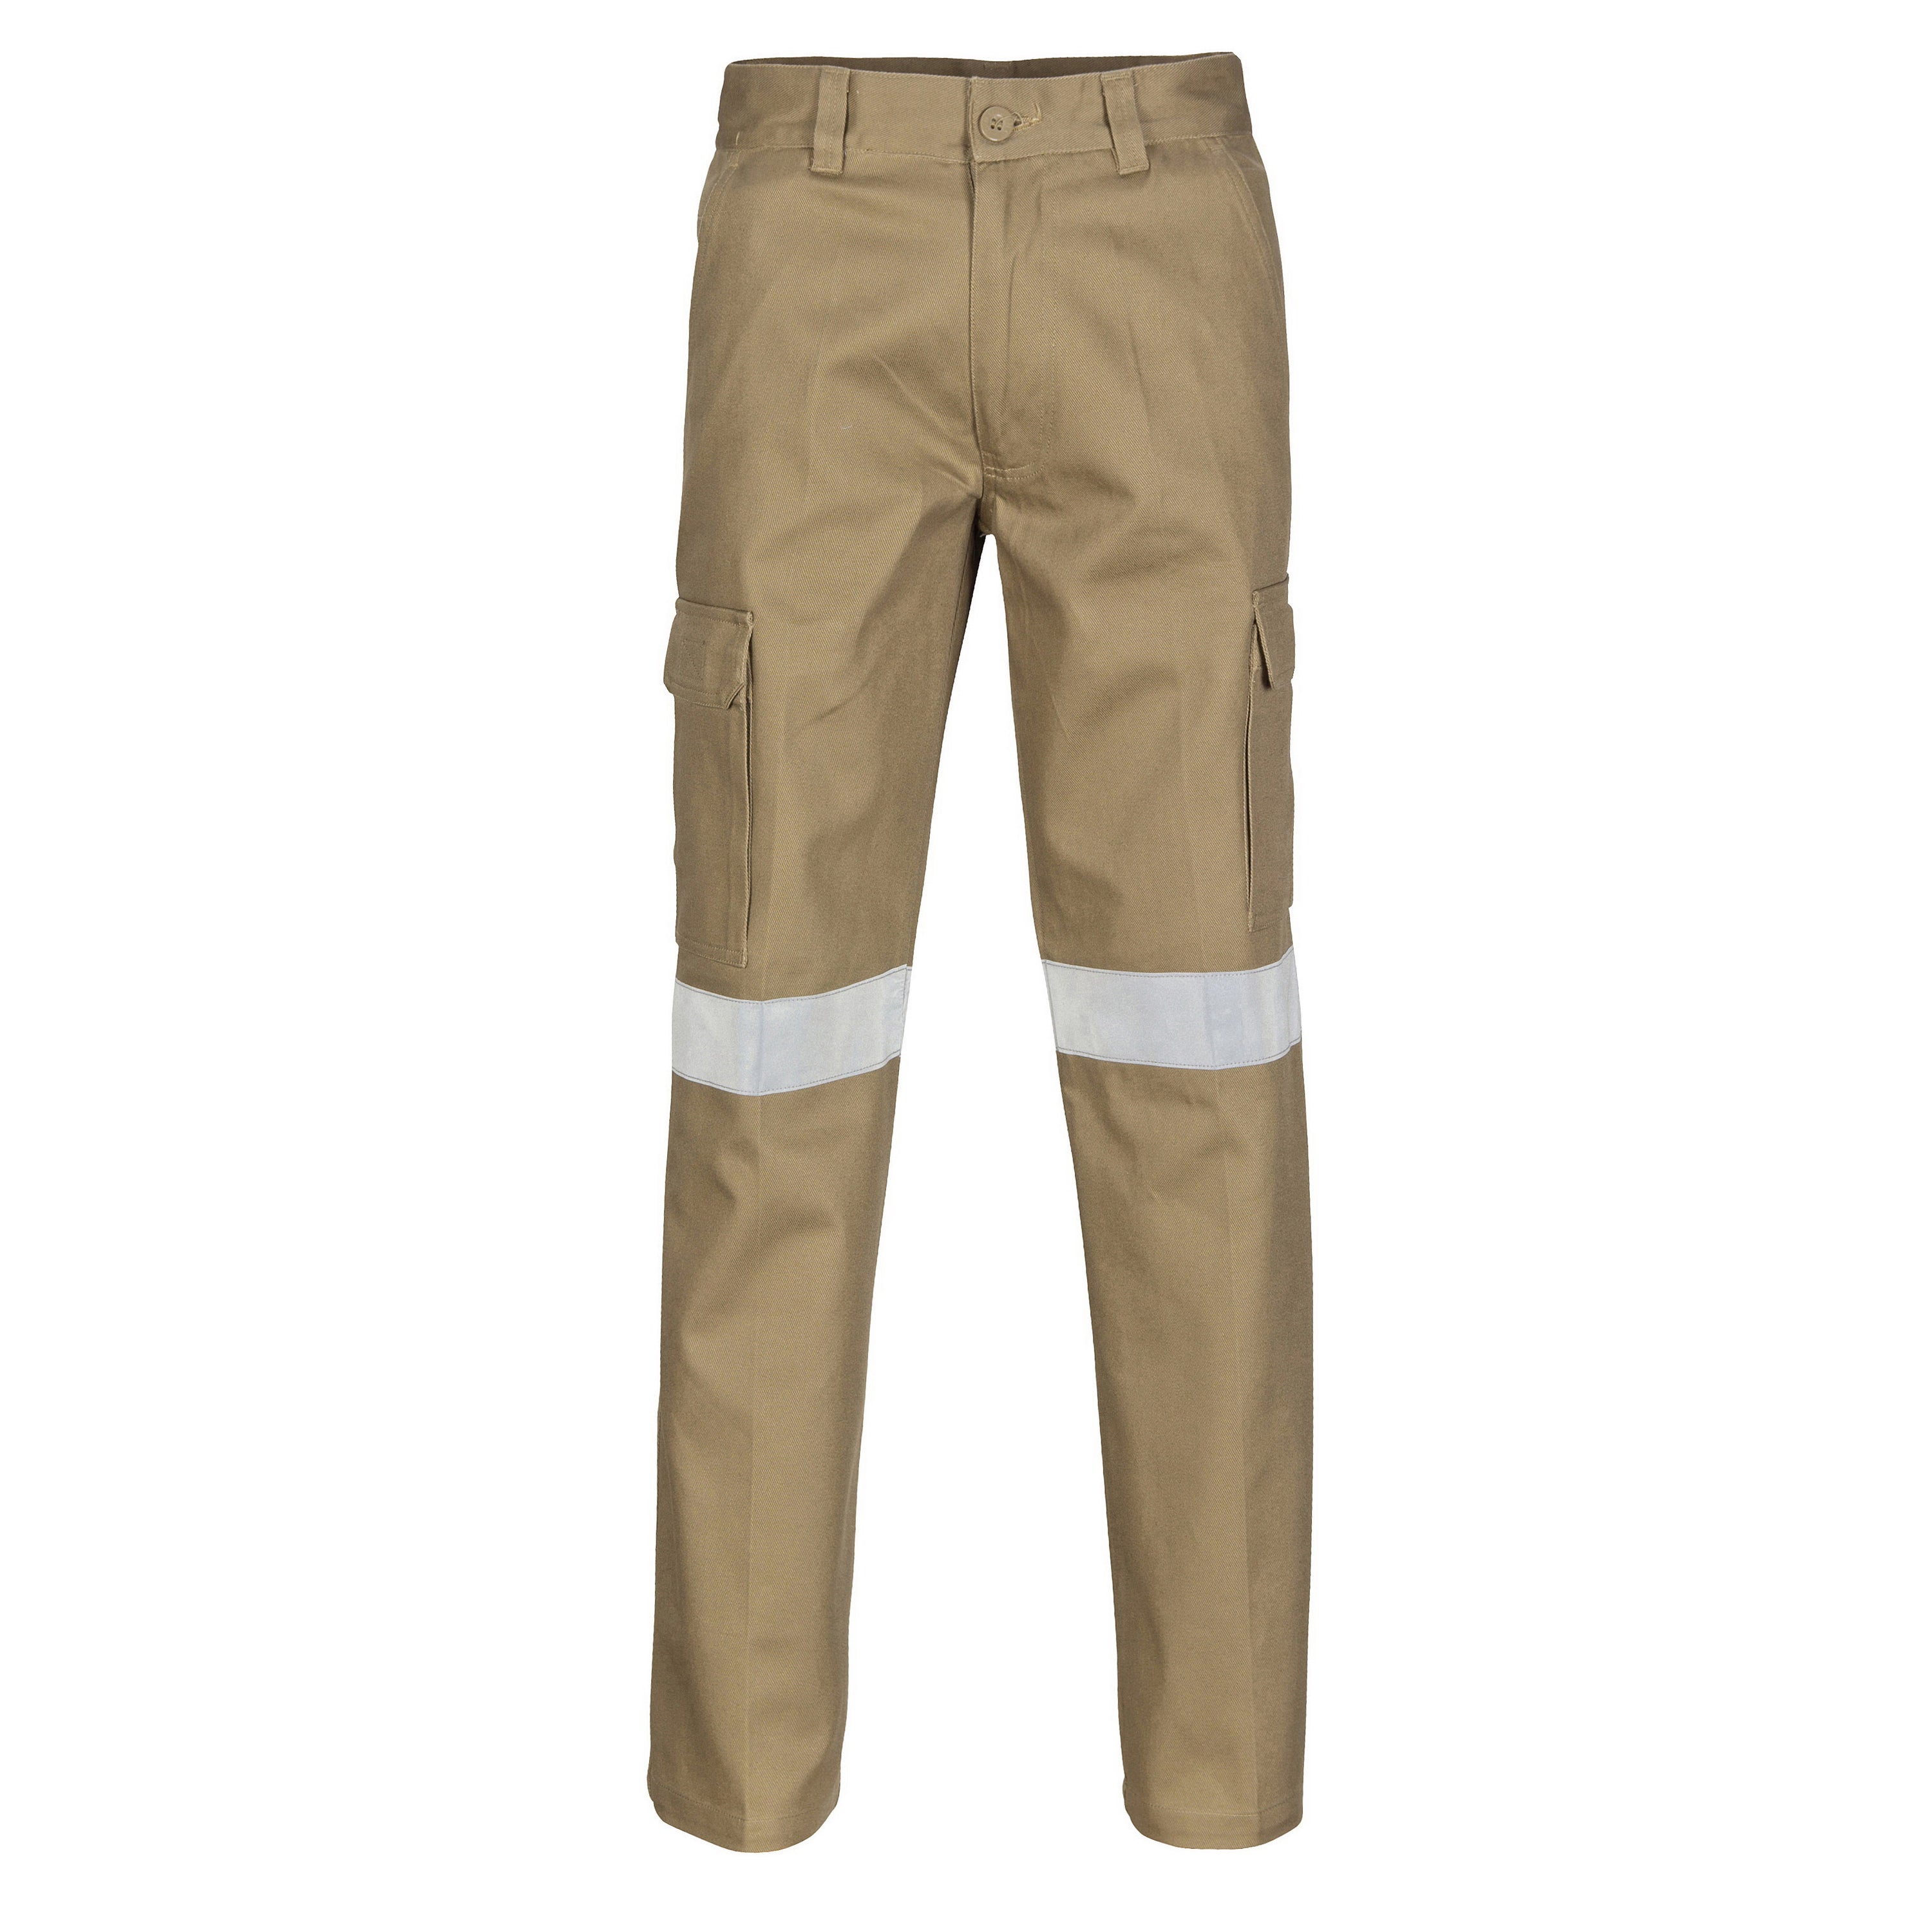 DNC 3319 Cotton Drill Cargo Pants With 3M R/Tape